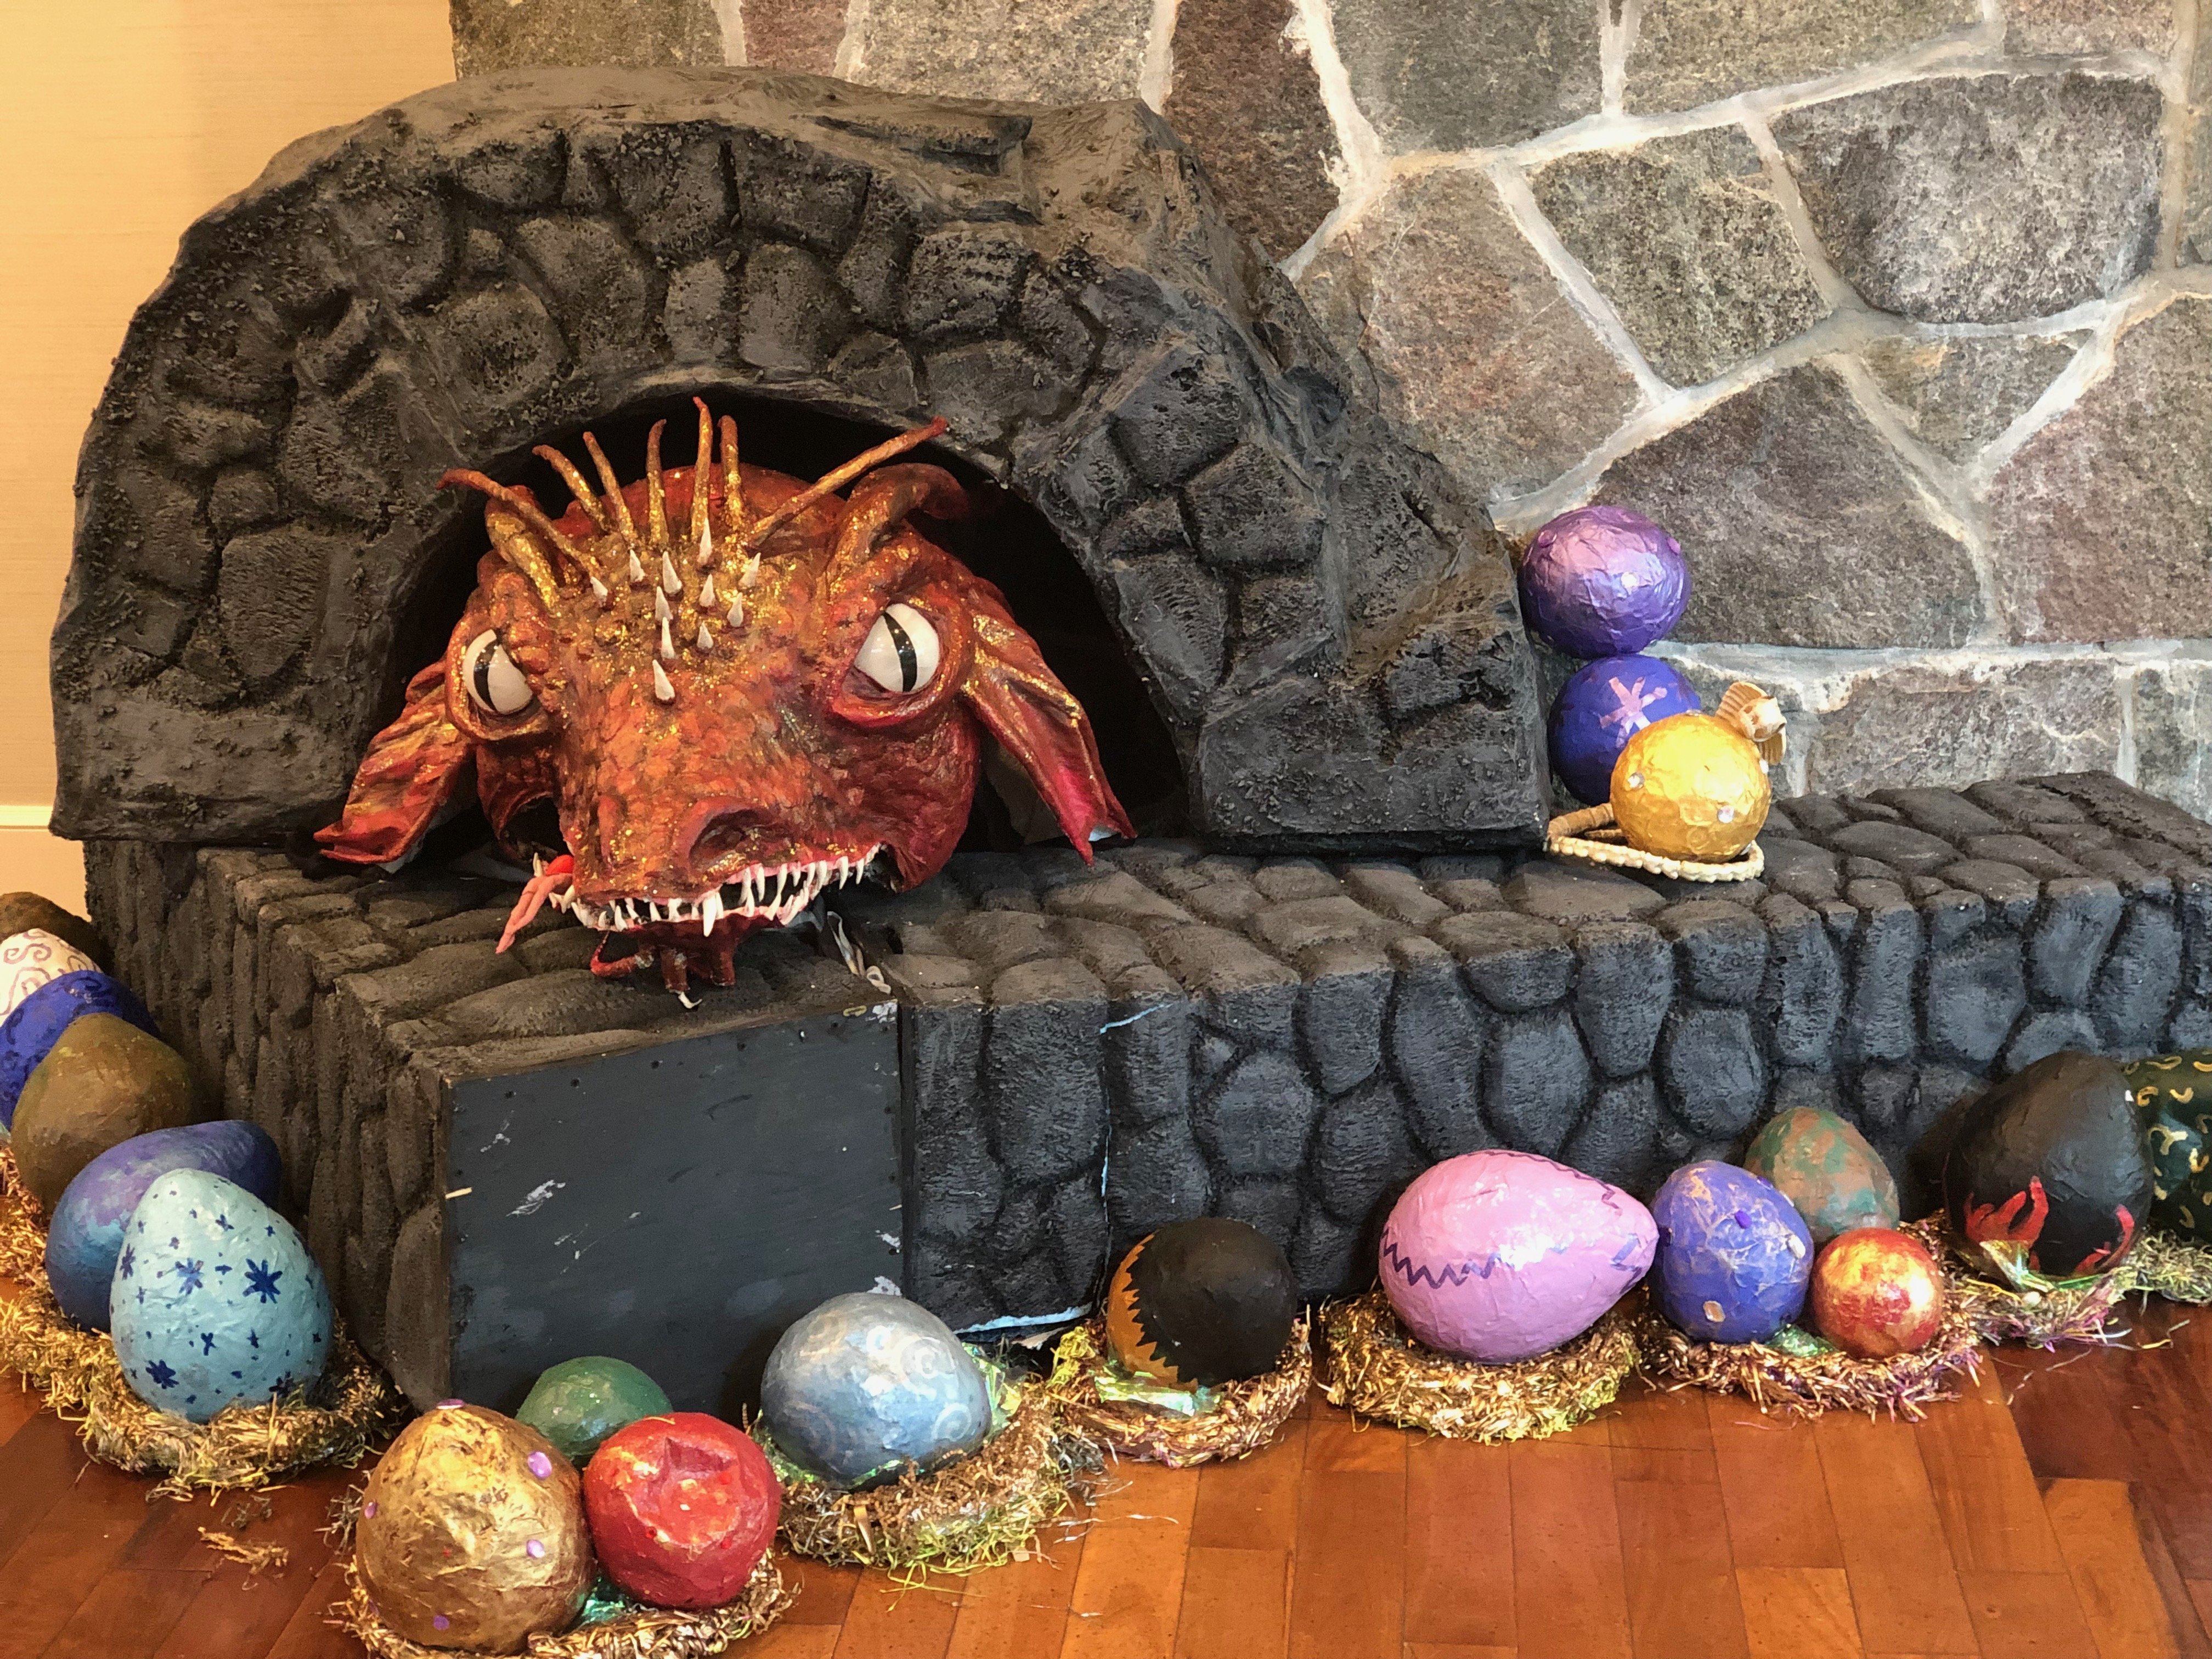 A homemade dragon, surrounded by eggs, decorating the con area